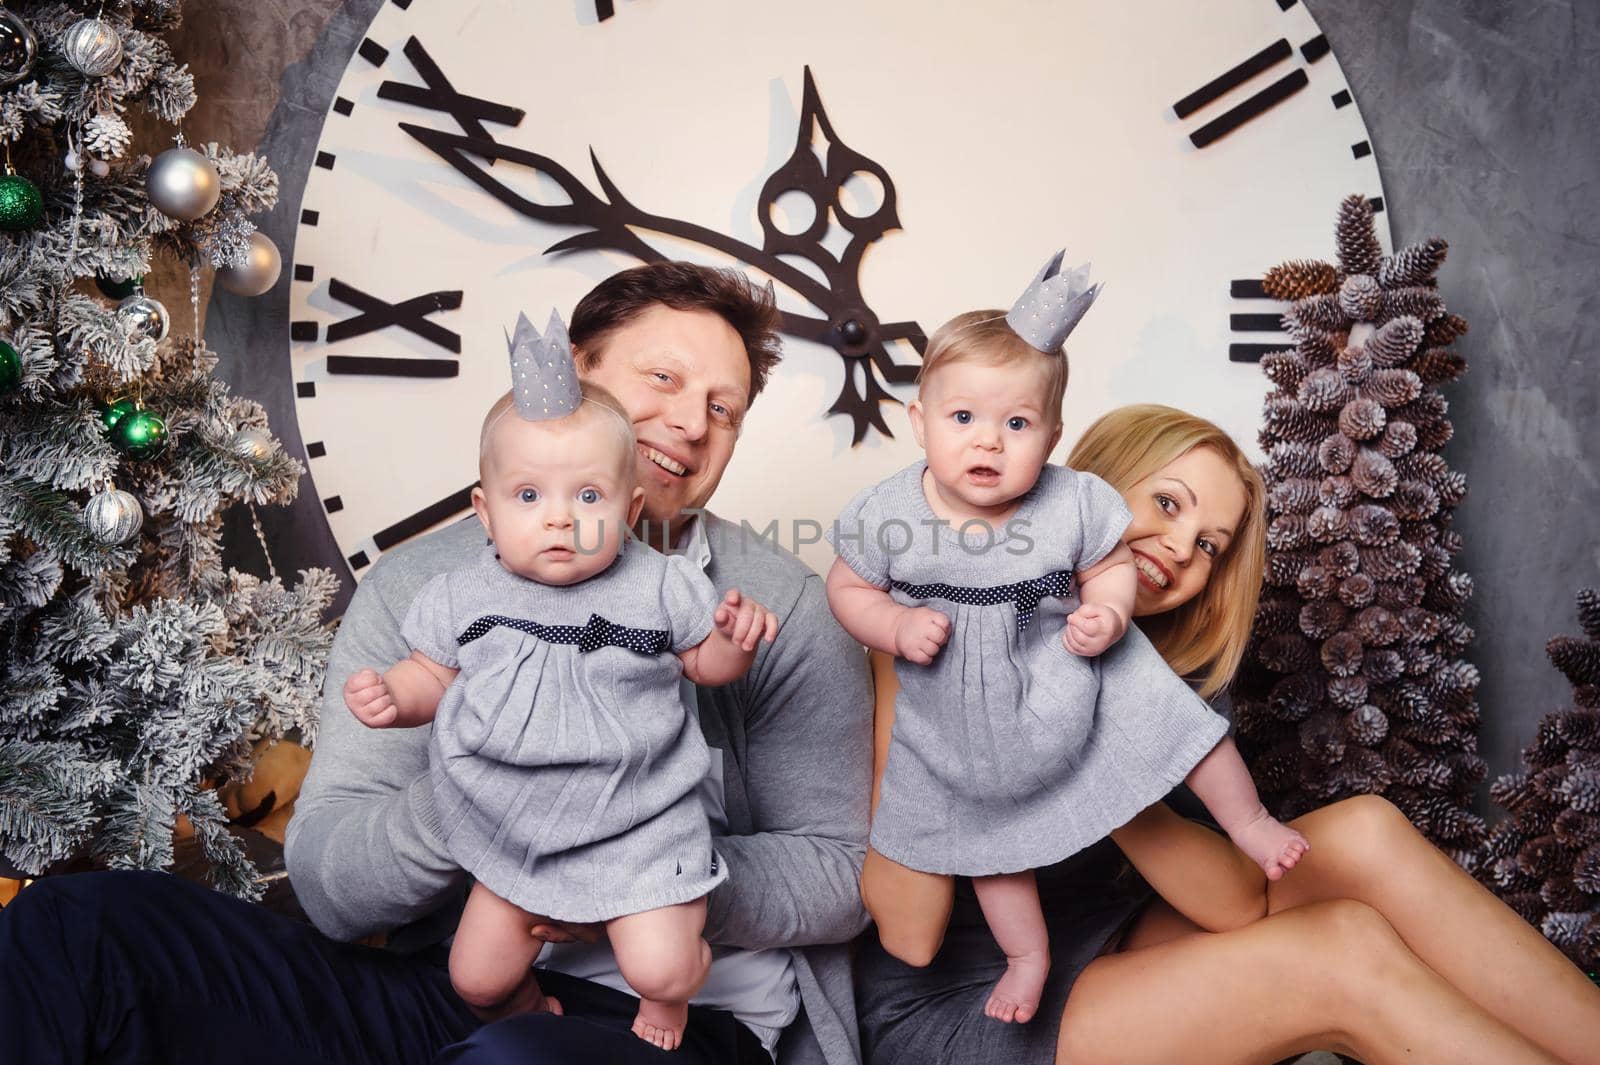 A happy big family with twin children in the New Year's interior of the house against the background of a large clock.